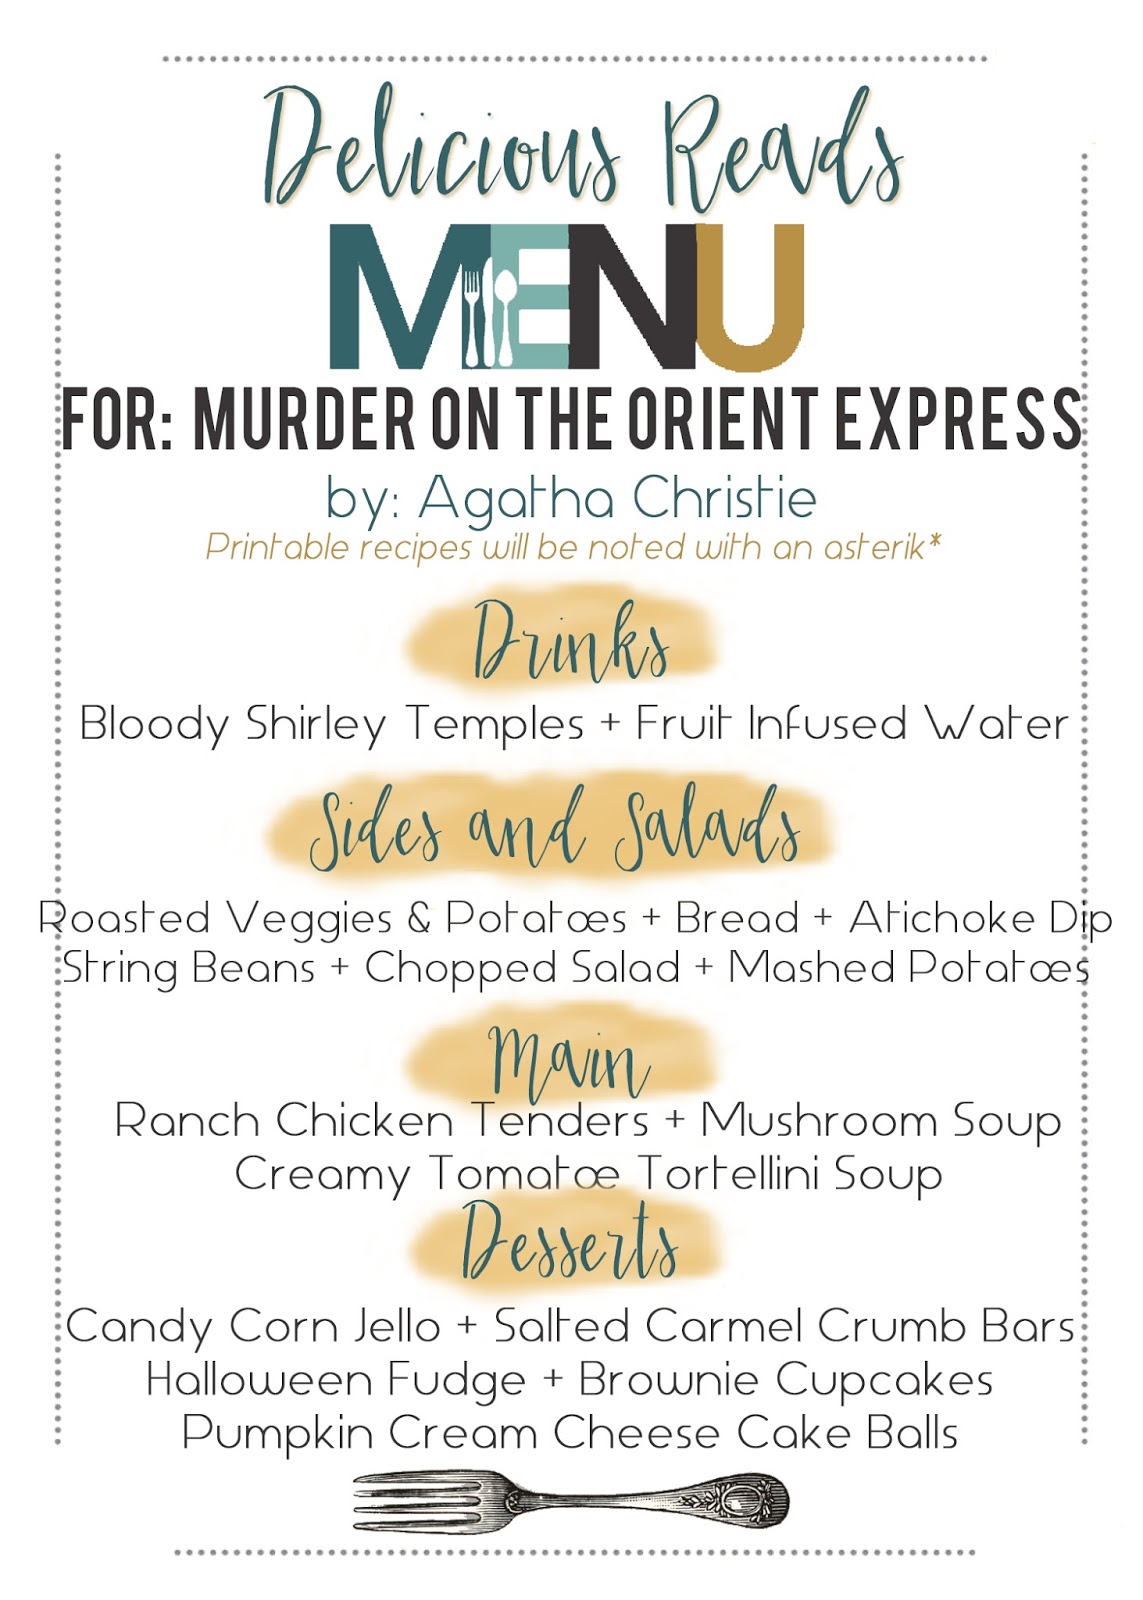 Delicious Reads: Food Ideas for "Murder on the Orient Express" {by Agatha Christie}